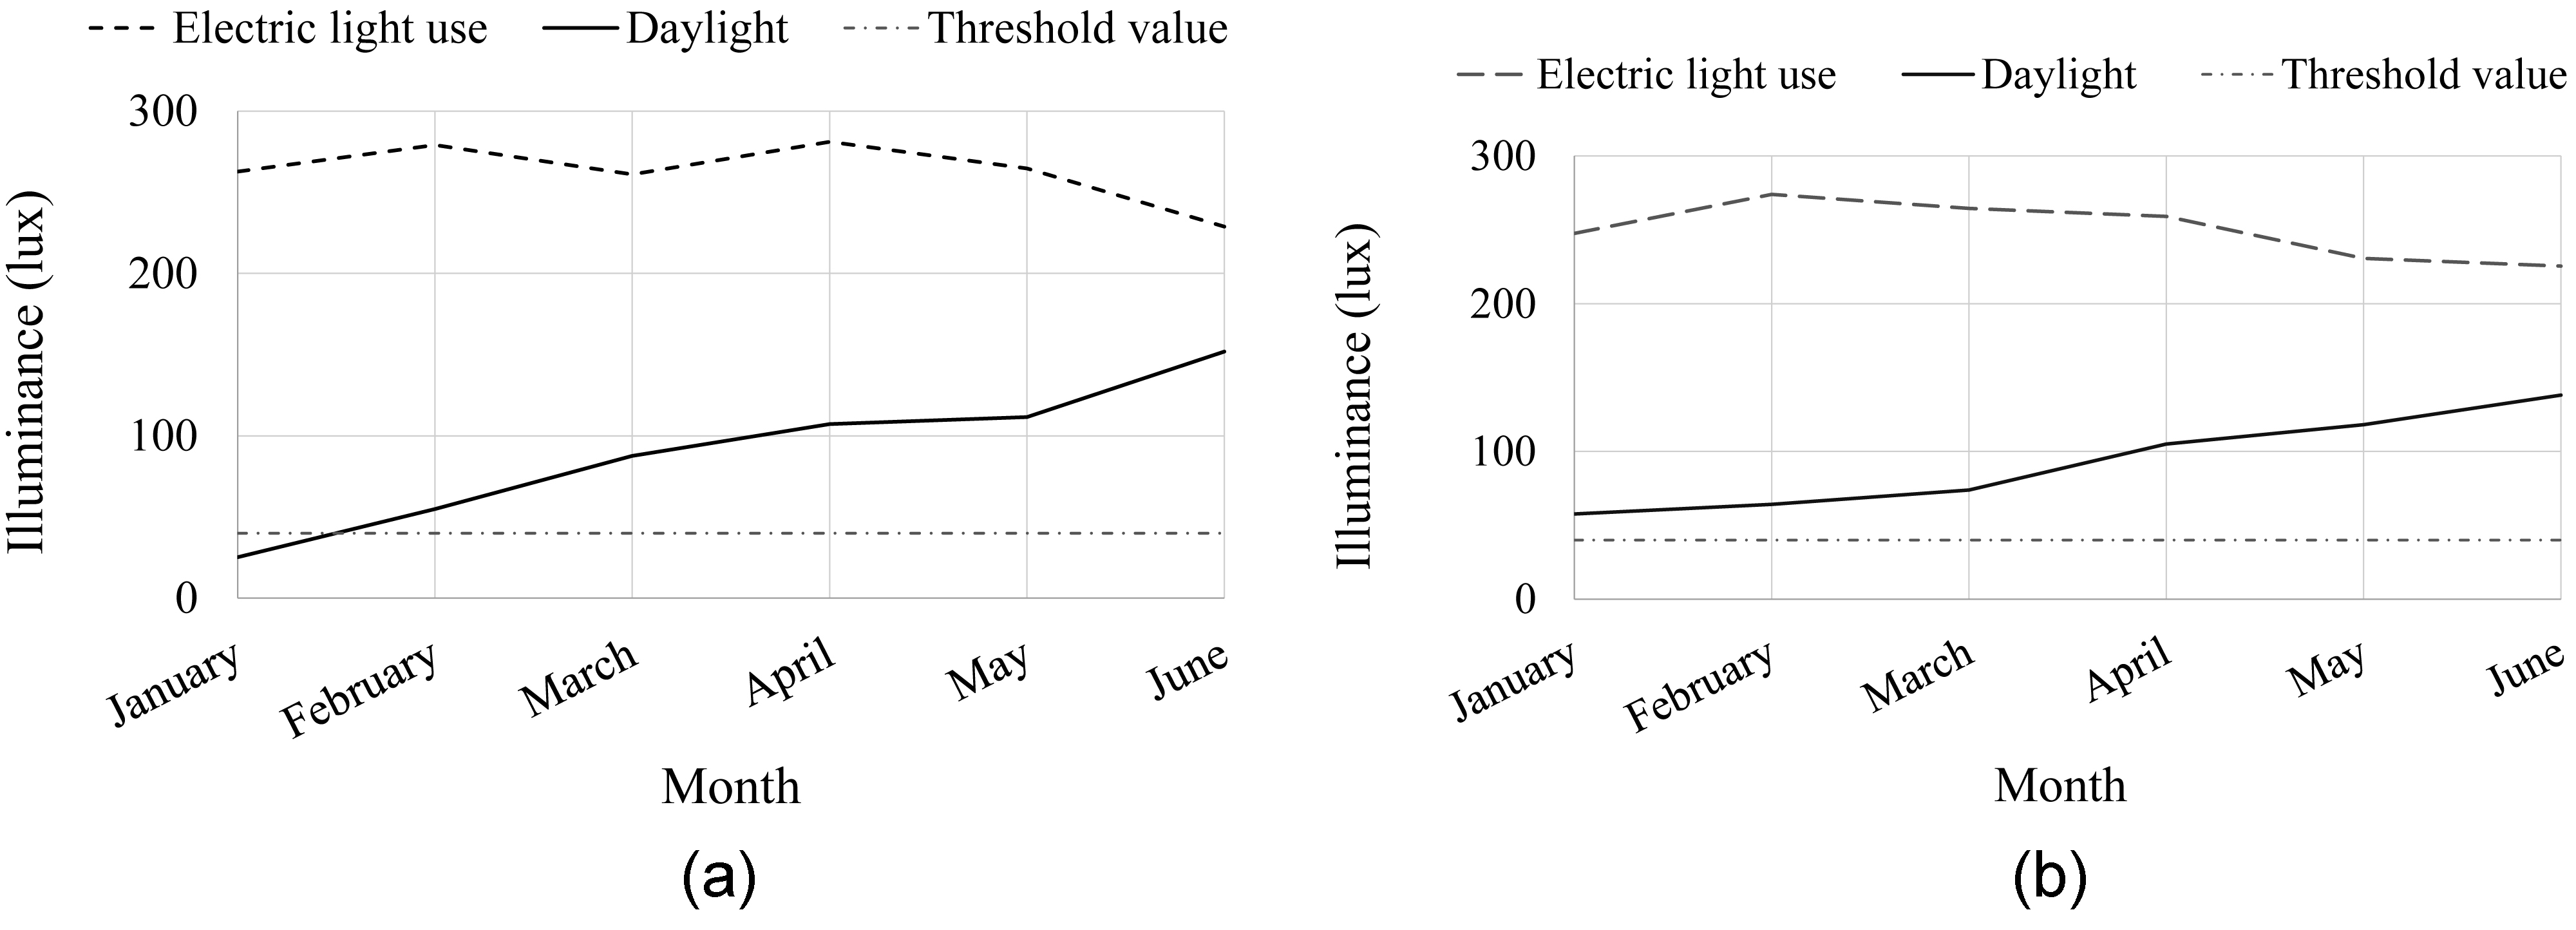 Calculated mean illuminance, based on measurements from sensor s1 and v1 at 0.7 m above floor level, from light pipes and from electric lights between 08.00-16.00 during January to June, where the threshold value was 40 lux (dashed line) for (a) house 1 and (b) house 2.